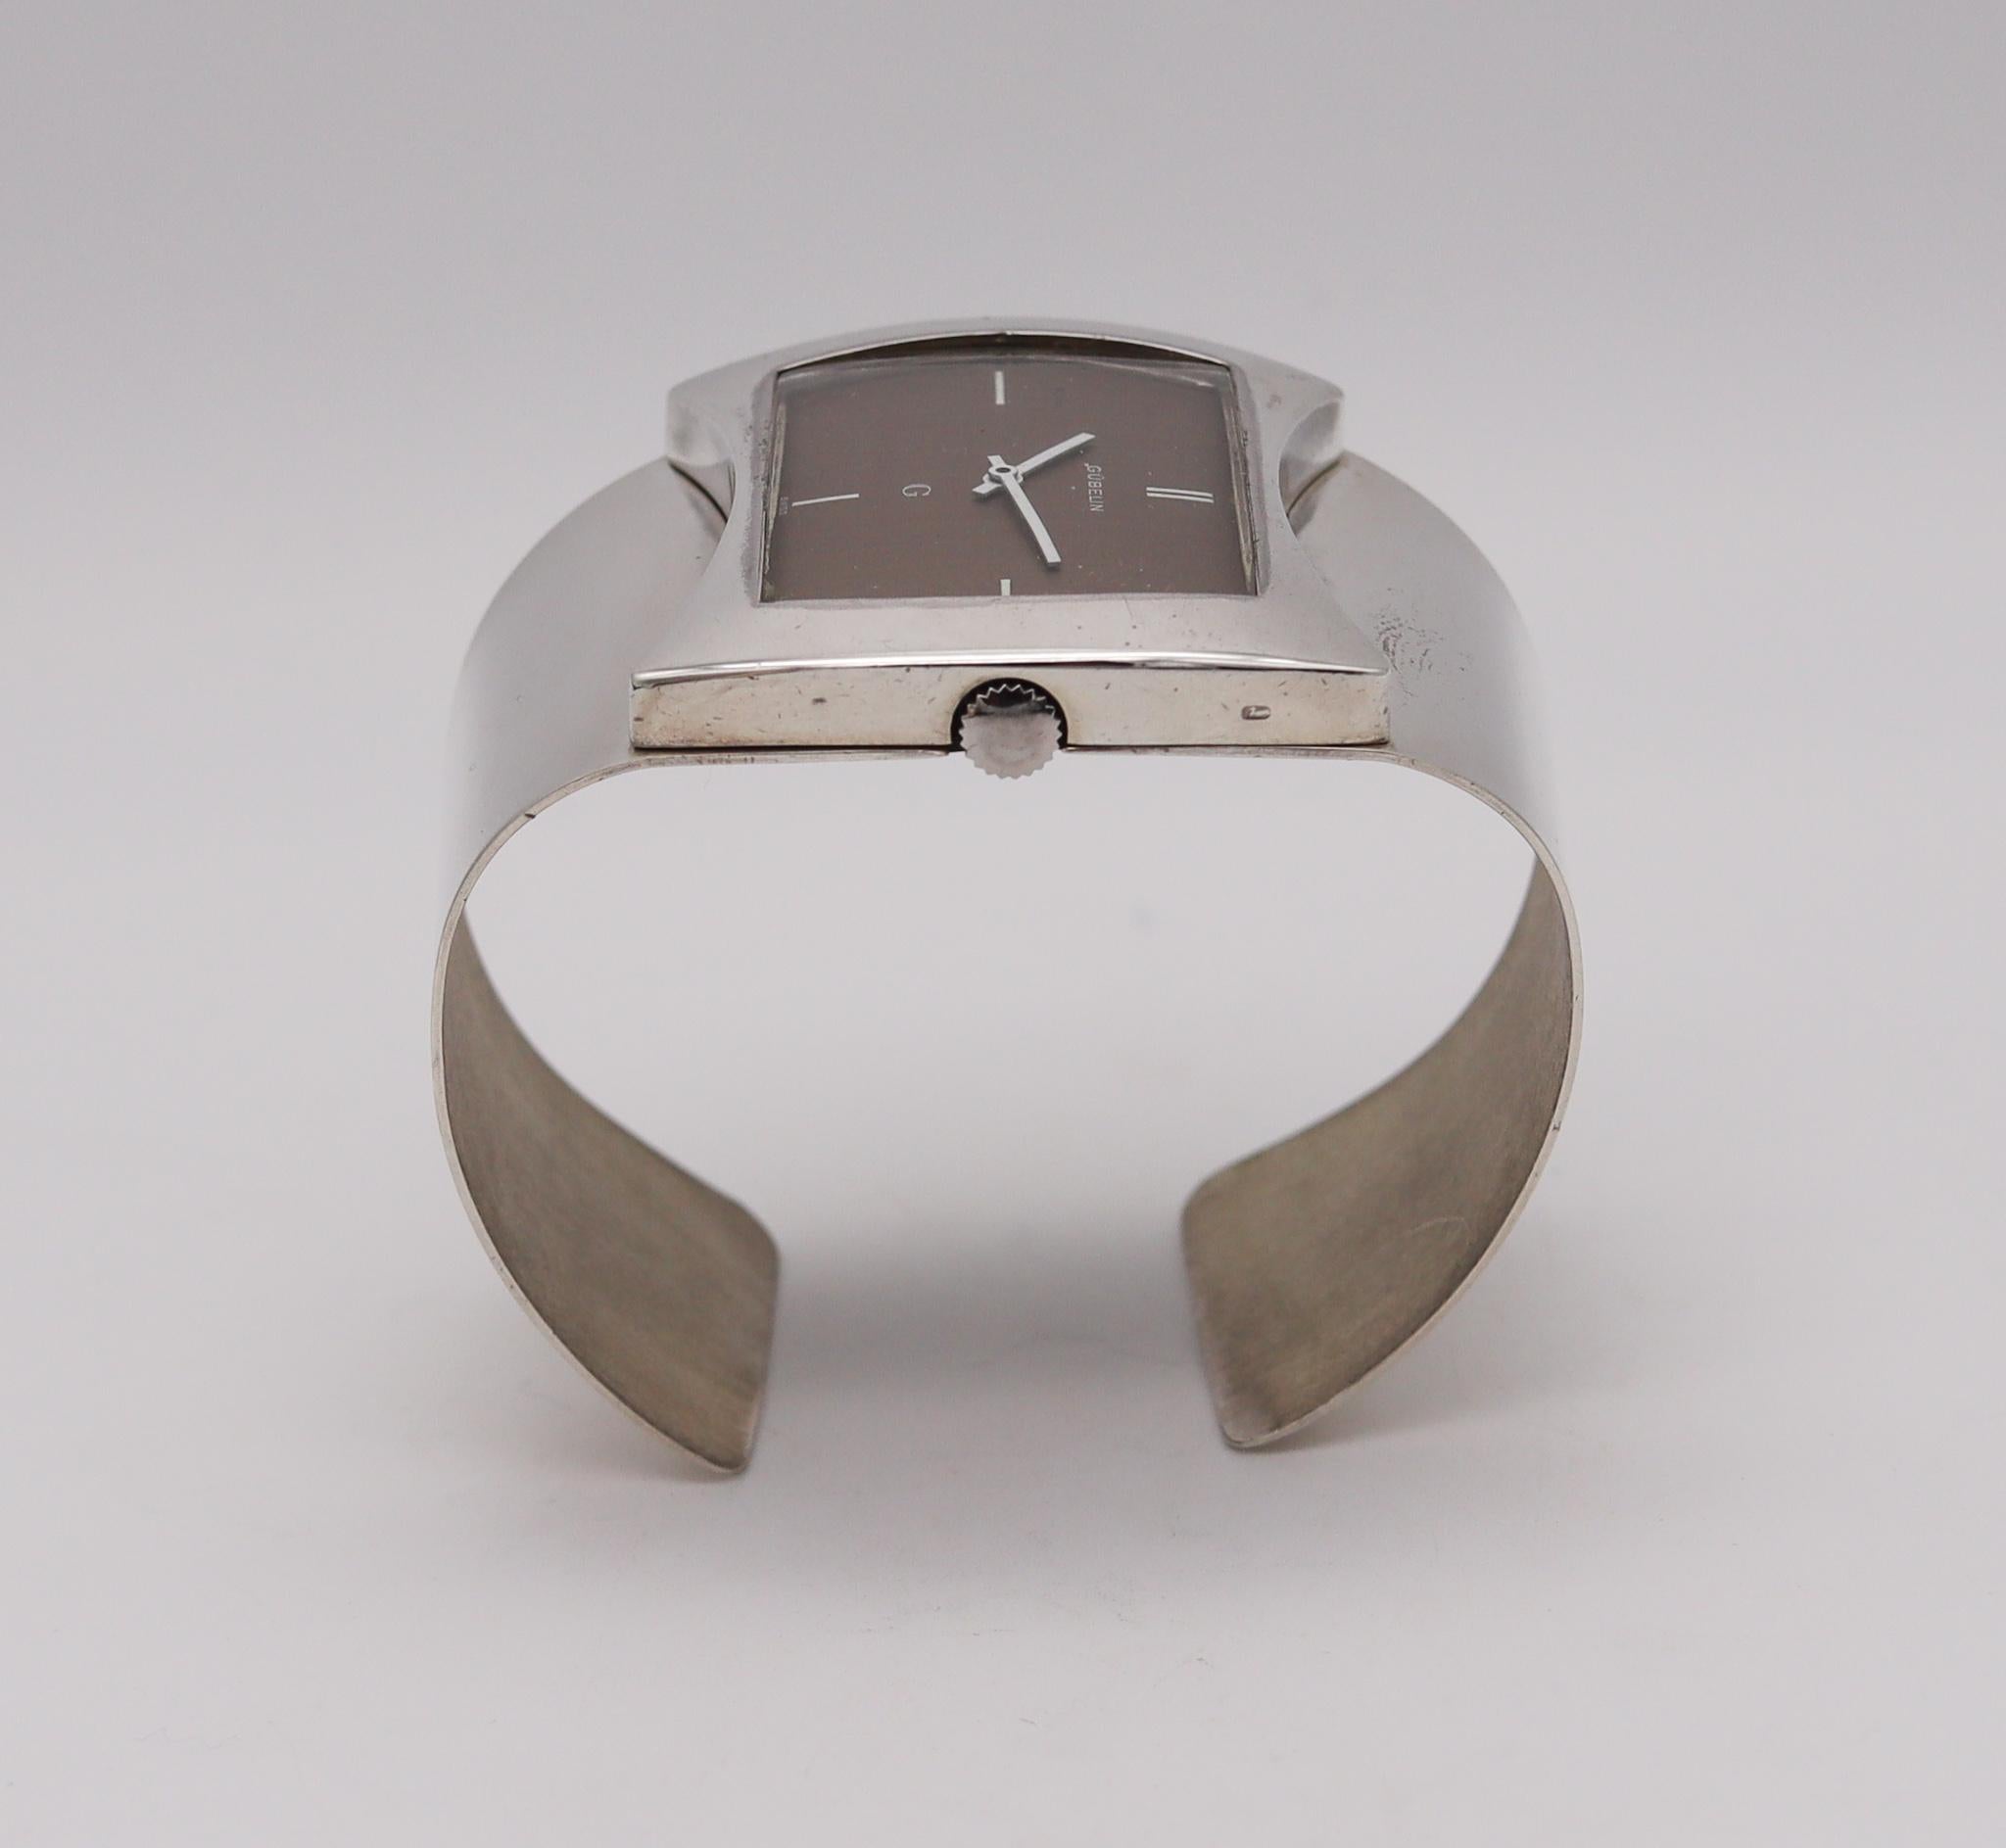 A retro wrist watch cuff designed by Gubelin.

Beautiful vintage cuff bracelet wristwatch, created in Zurich, Switzerland by the house of Gubelin, back in the 1973. This sculptural retro piece was part of the Lady G collection and has been crafted